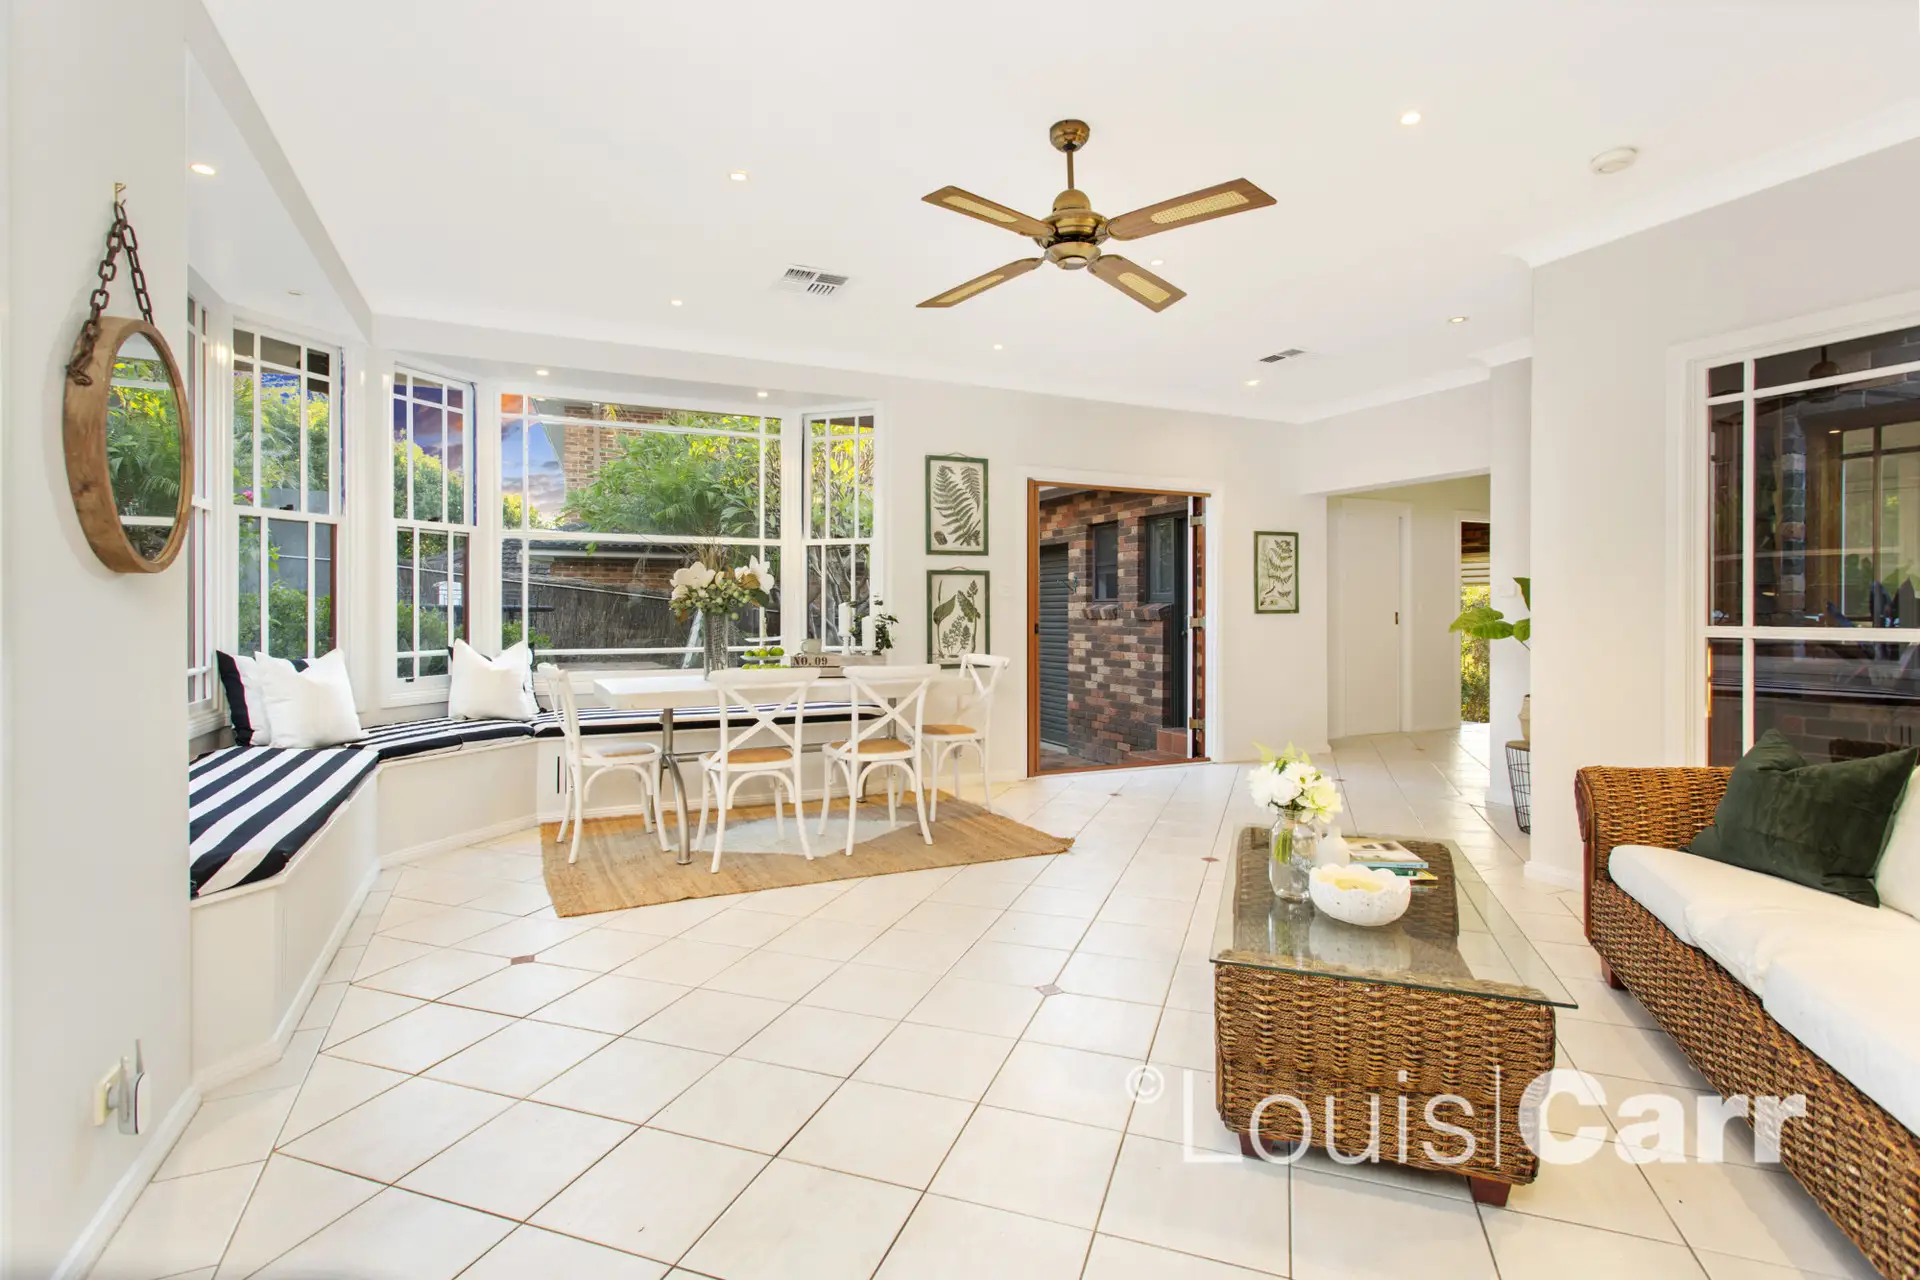 Photo #6: 17 Blue Jay Court, West Pennant Hills - Sold by Louis Carr Real Estate